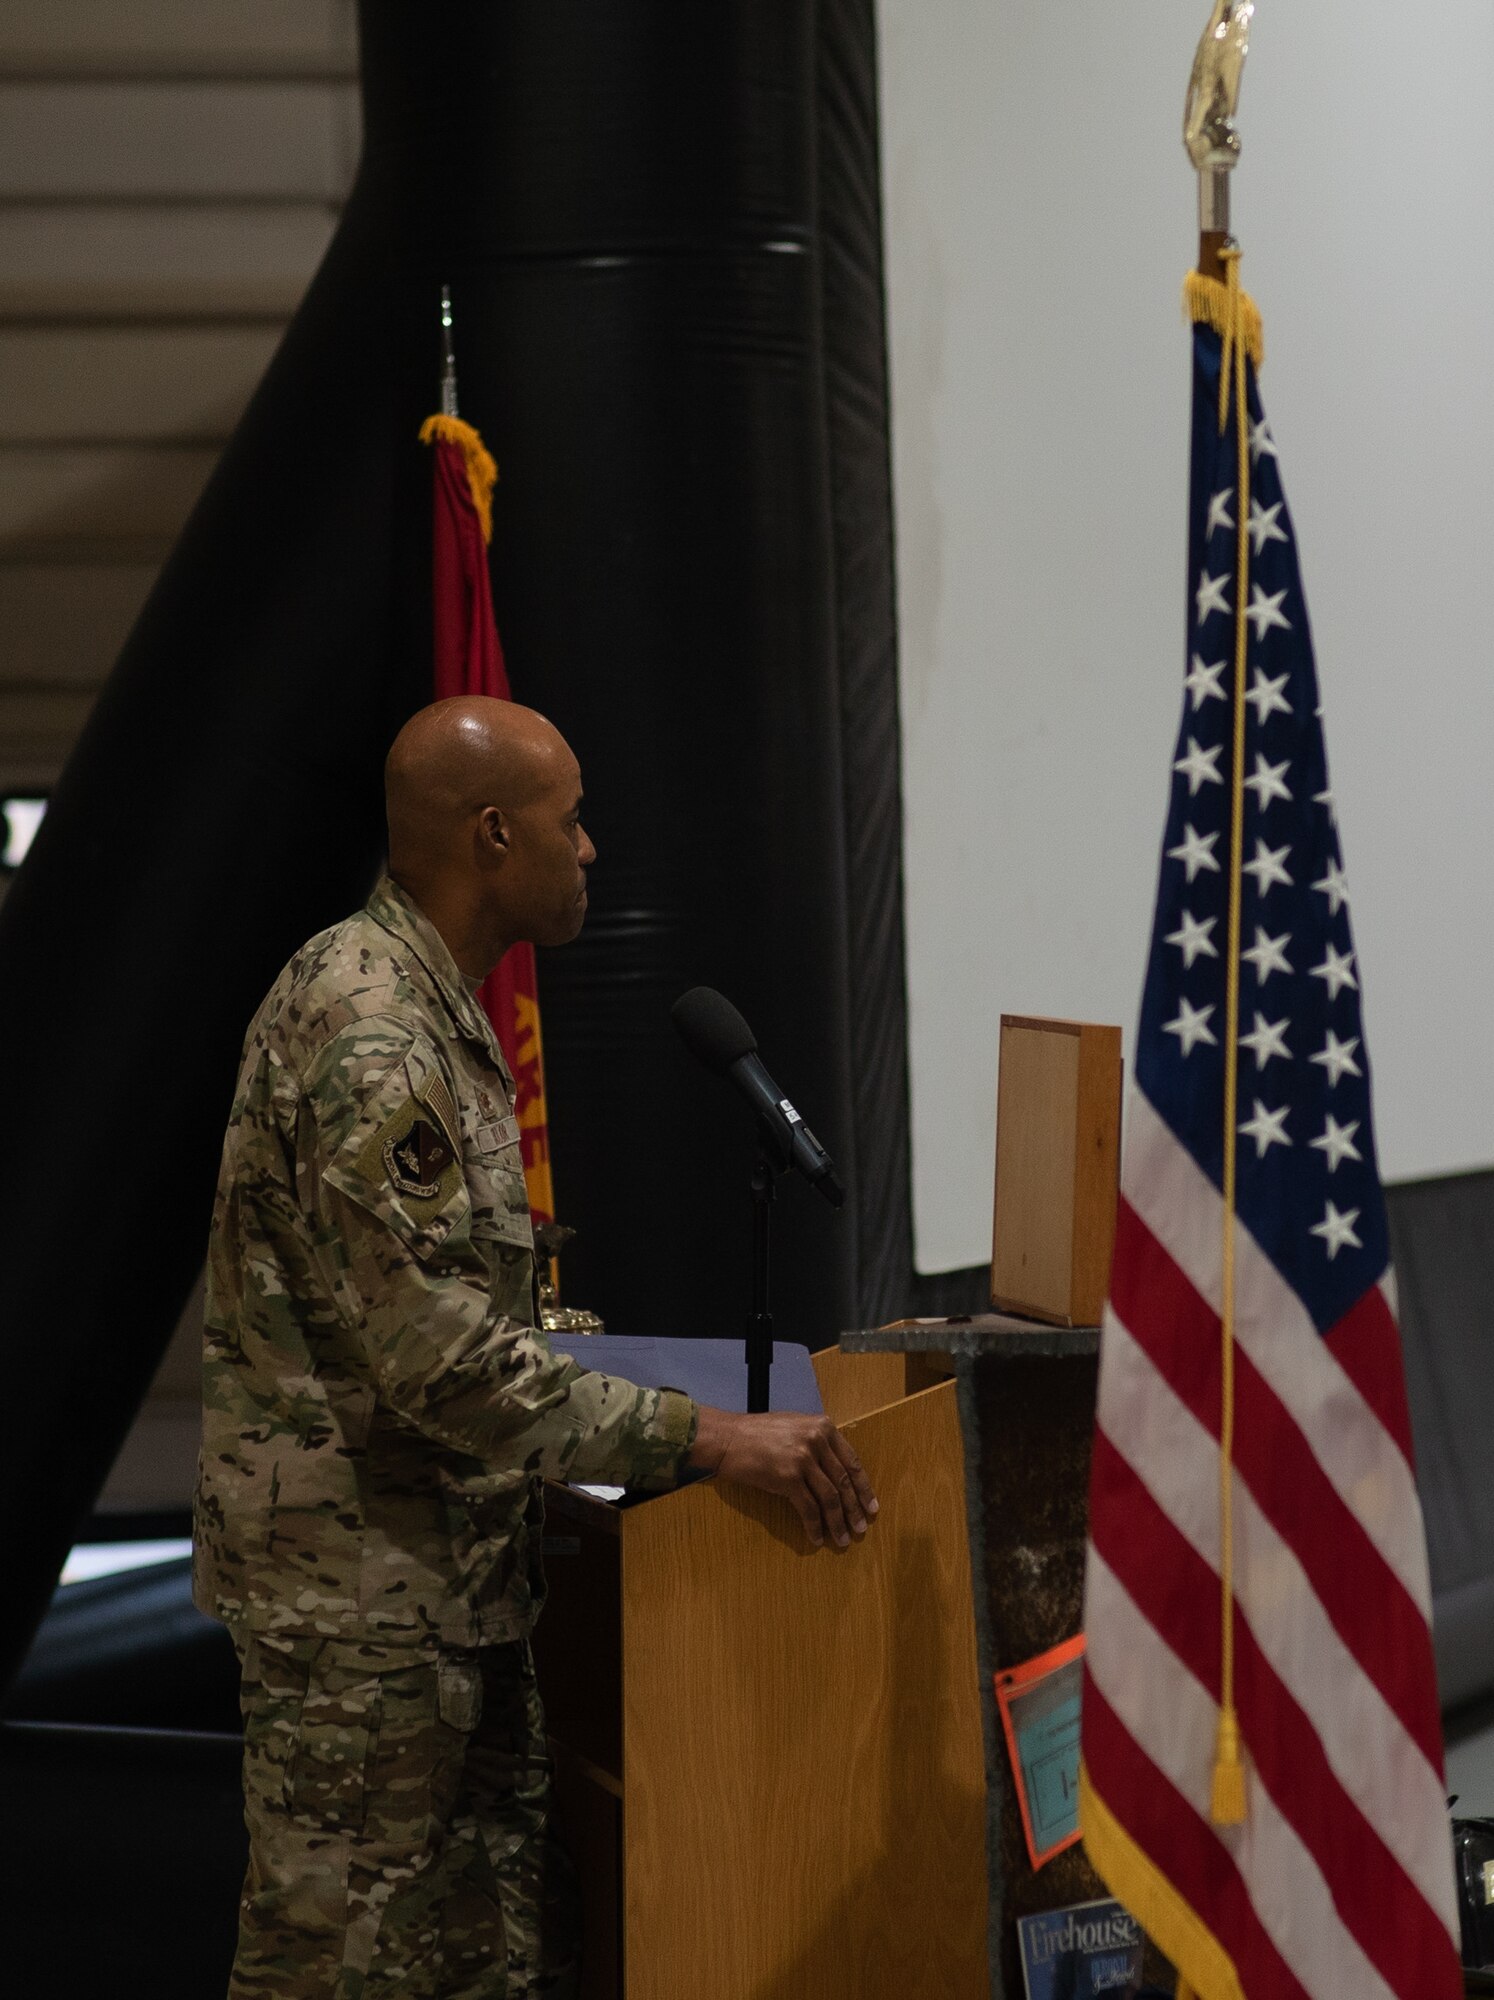 Col. Terence Taylor, 27th Special Operations Wing commander, shares his memories of the terrorist attacks on 9/11 during a memorial ceremony at Cannon Air Force Base, N.M., Sep. 11, 2021. The memorial ceremony marks the 20th anniversary of the terrorist attacks on the United States and serves as a reminder of AFSOC’s everchanging future with the end on the global war on terrorism, and a new focus on great power competition. (U.S. Air Force photo by Senior Airman Christopher Storer)